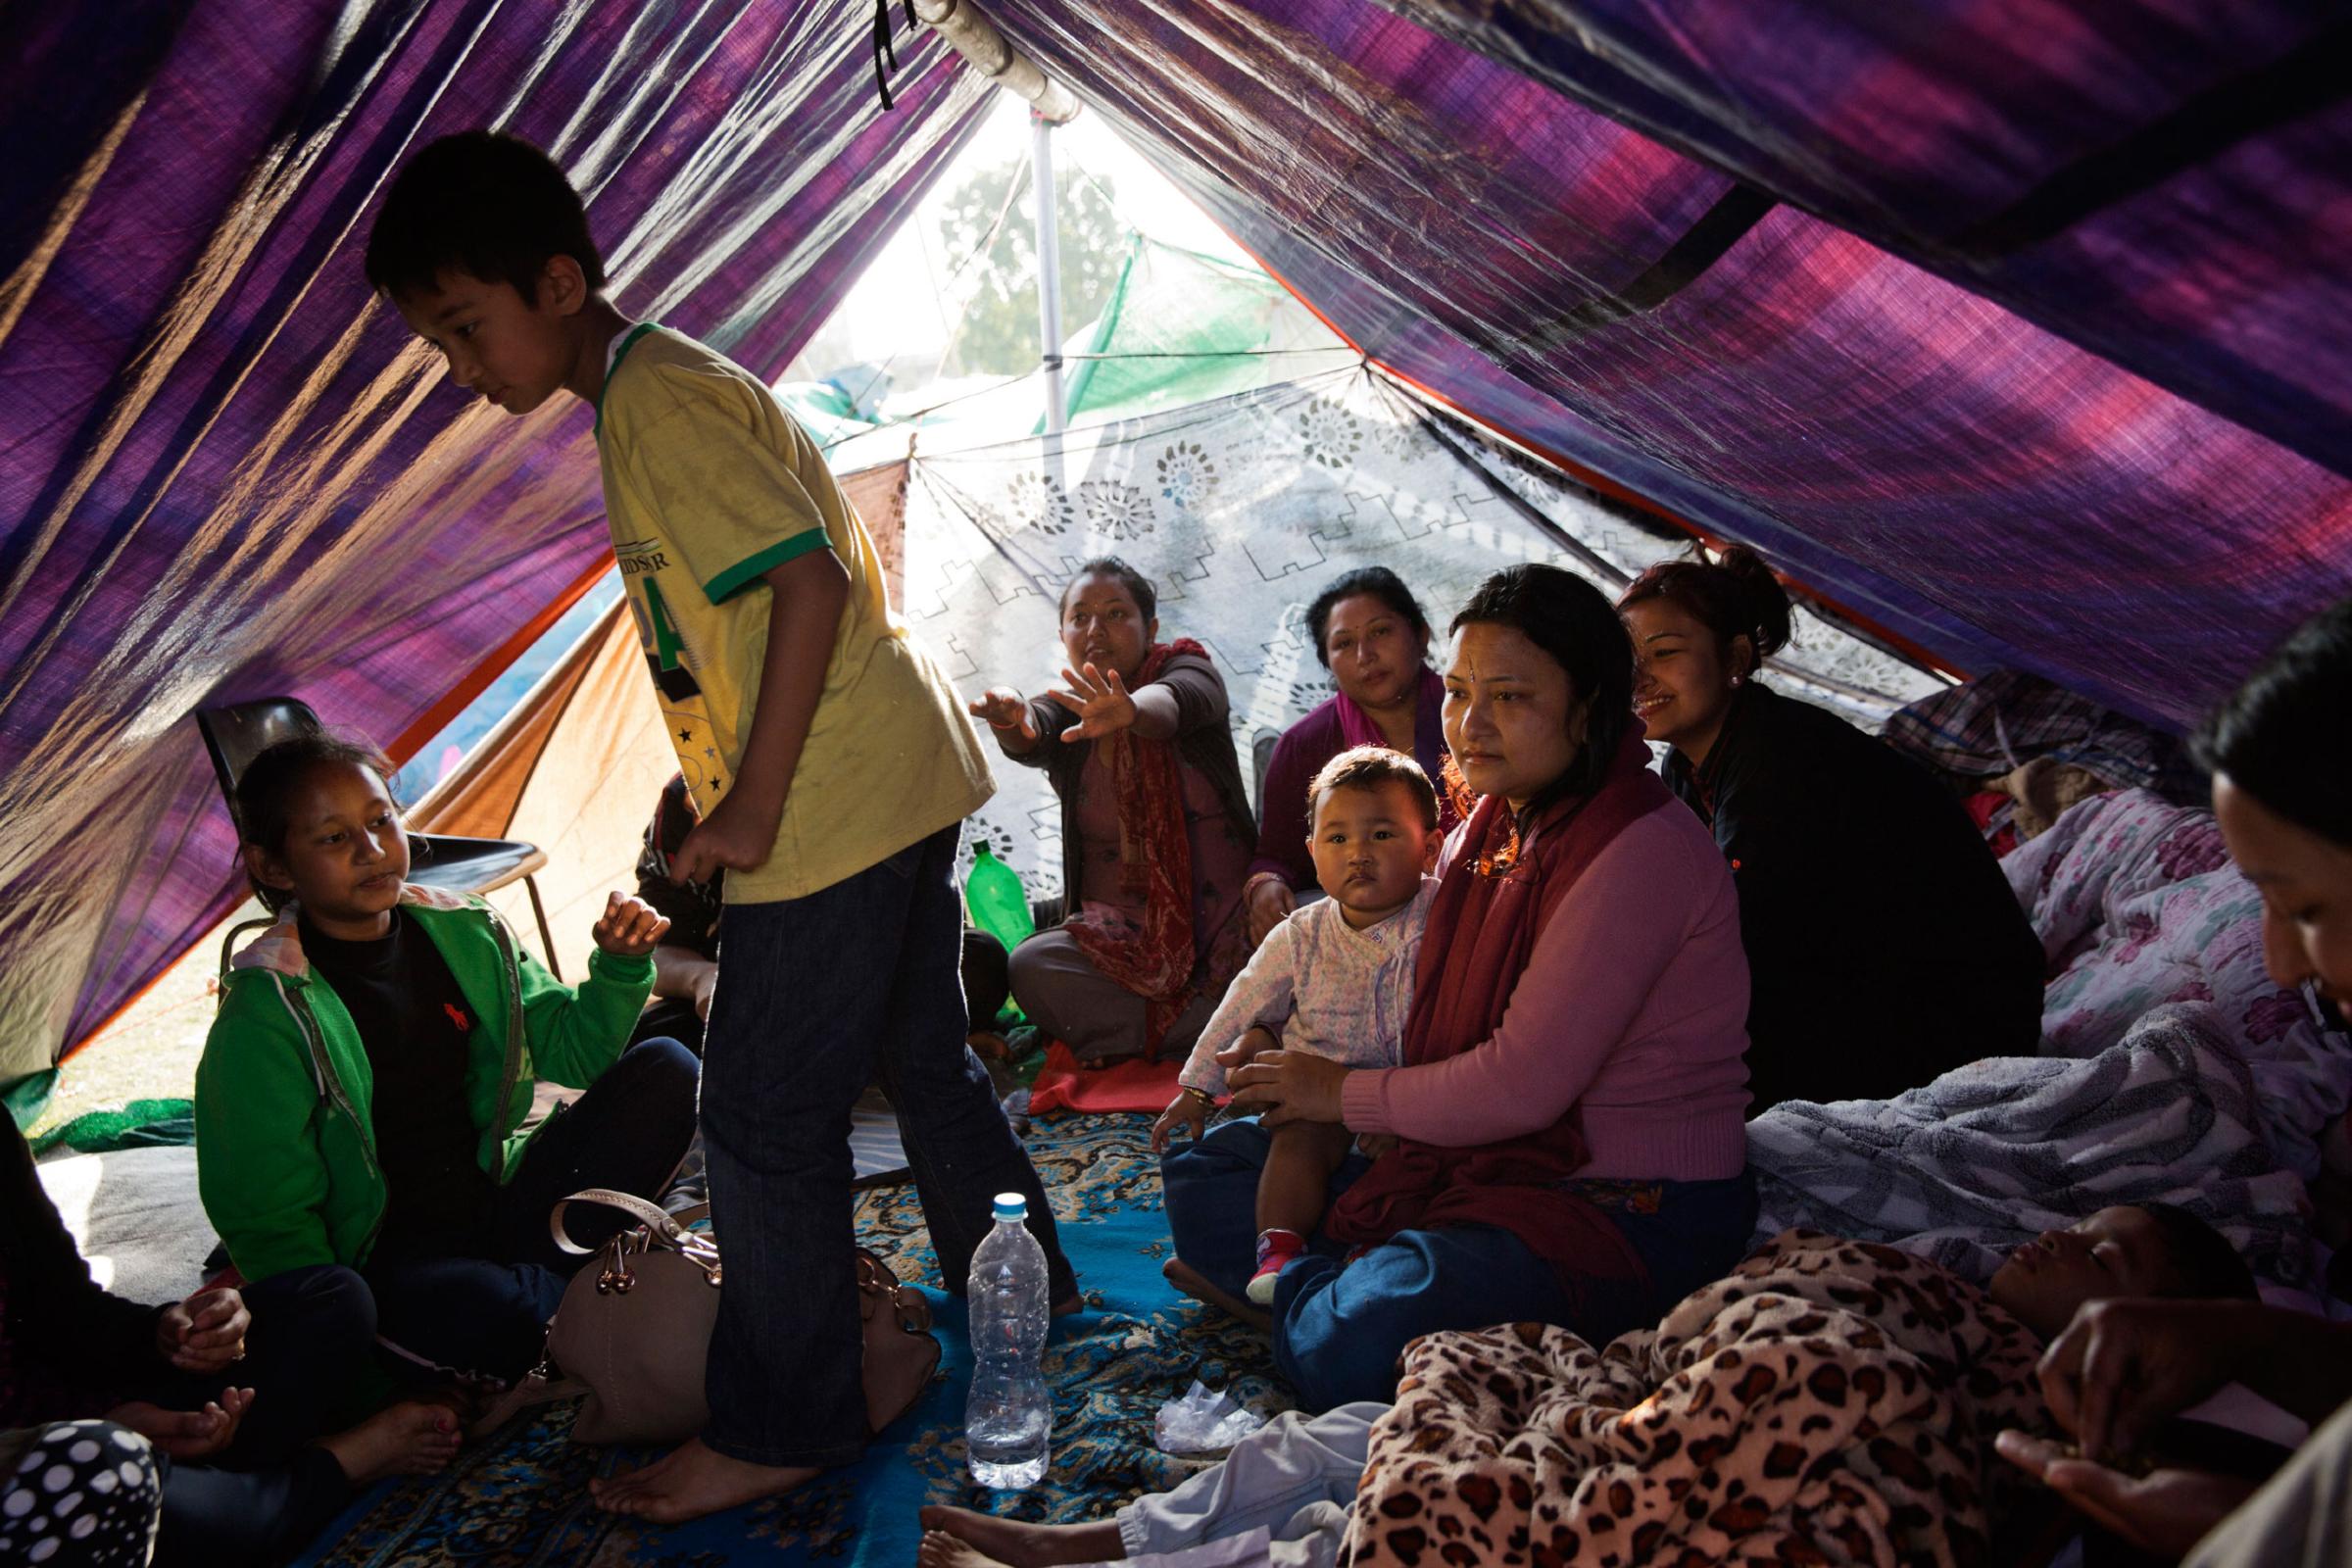 A displaced Nepali family take shelter in a tent in a park in Kathmandu, Nepal on April. 27, 2015. Nepal had a severe earthquake on April 25th. Photo by Adam Ferguson for Time